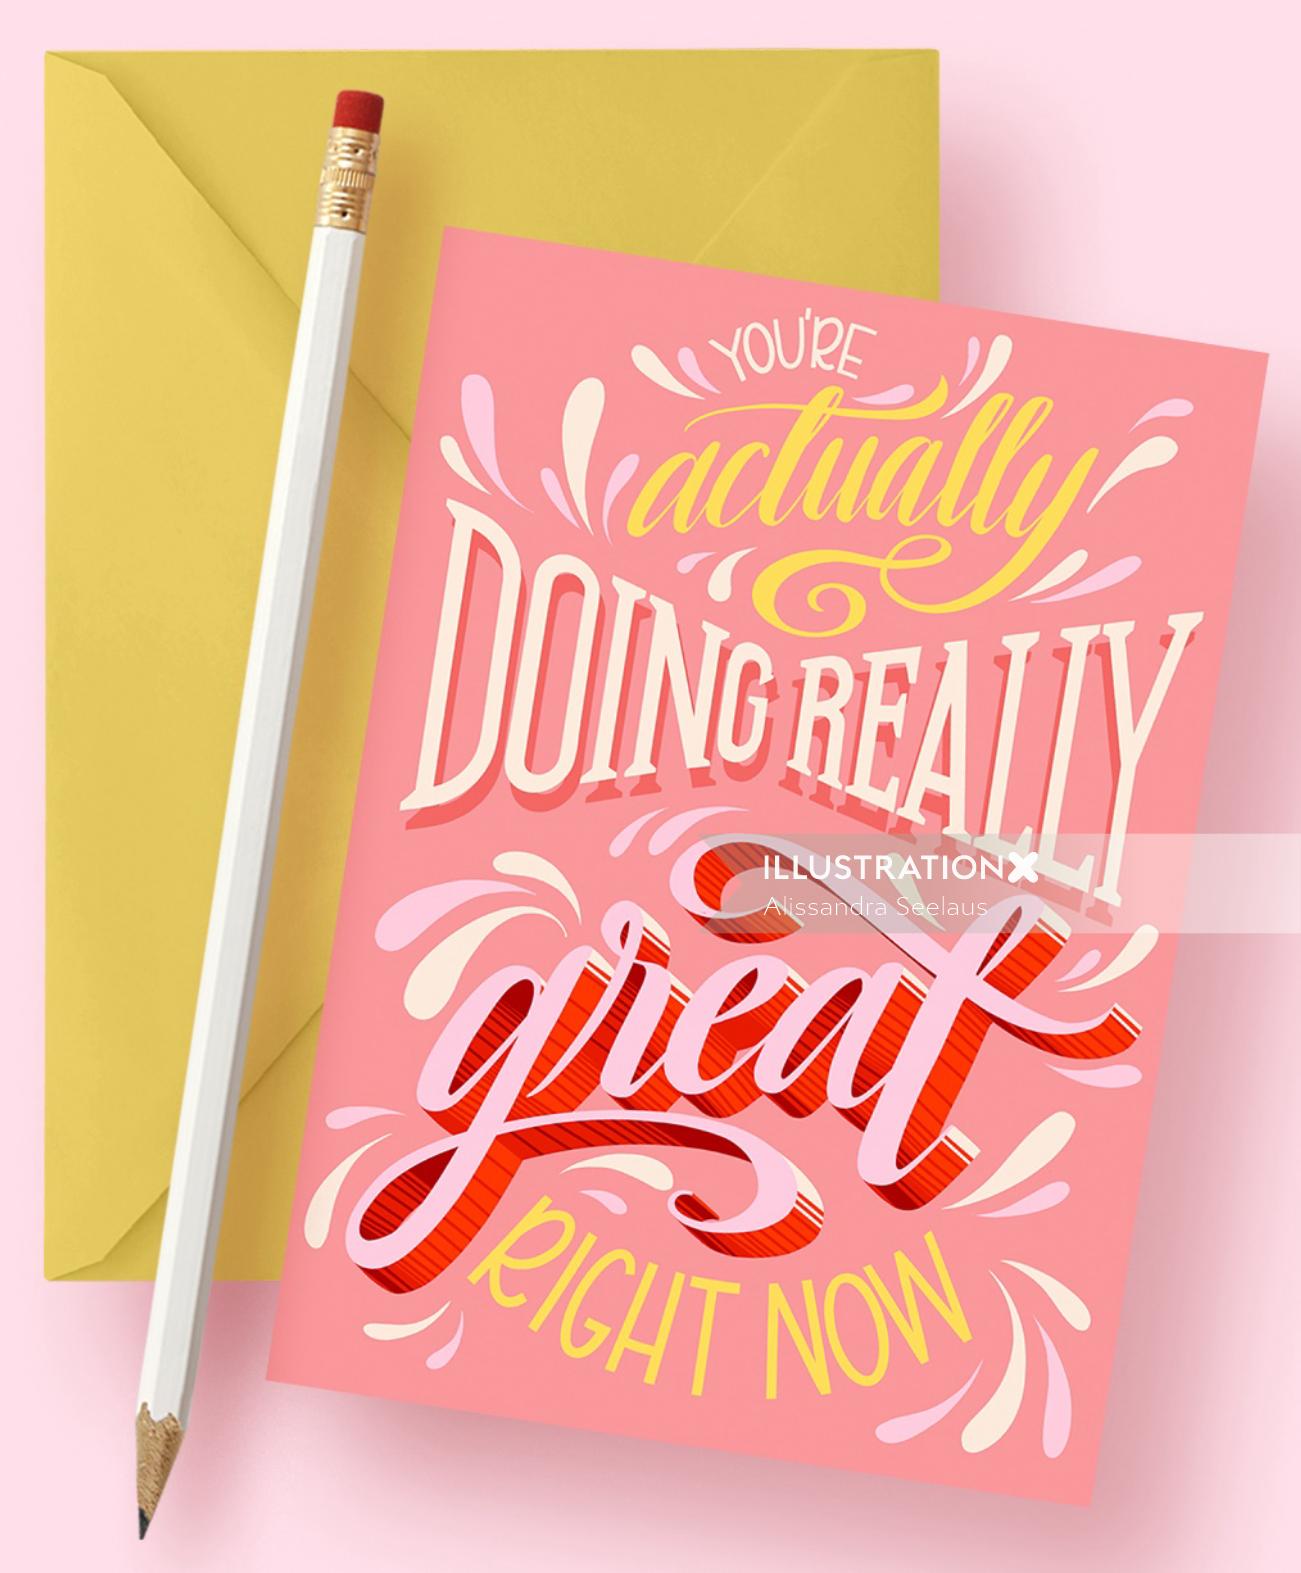 Lettering art of your actually doing really great